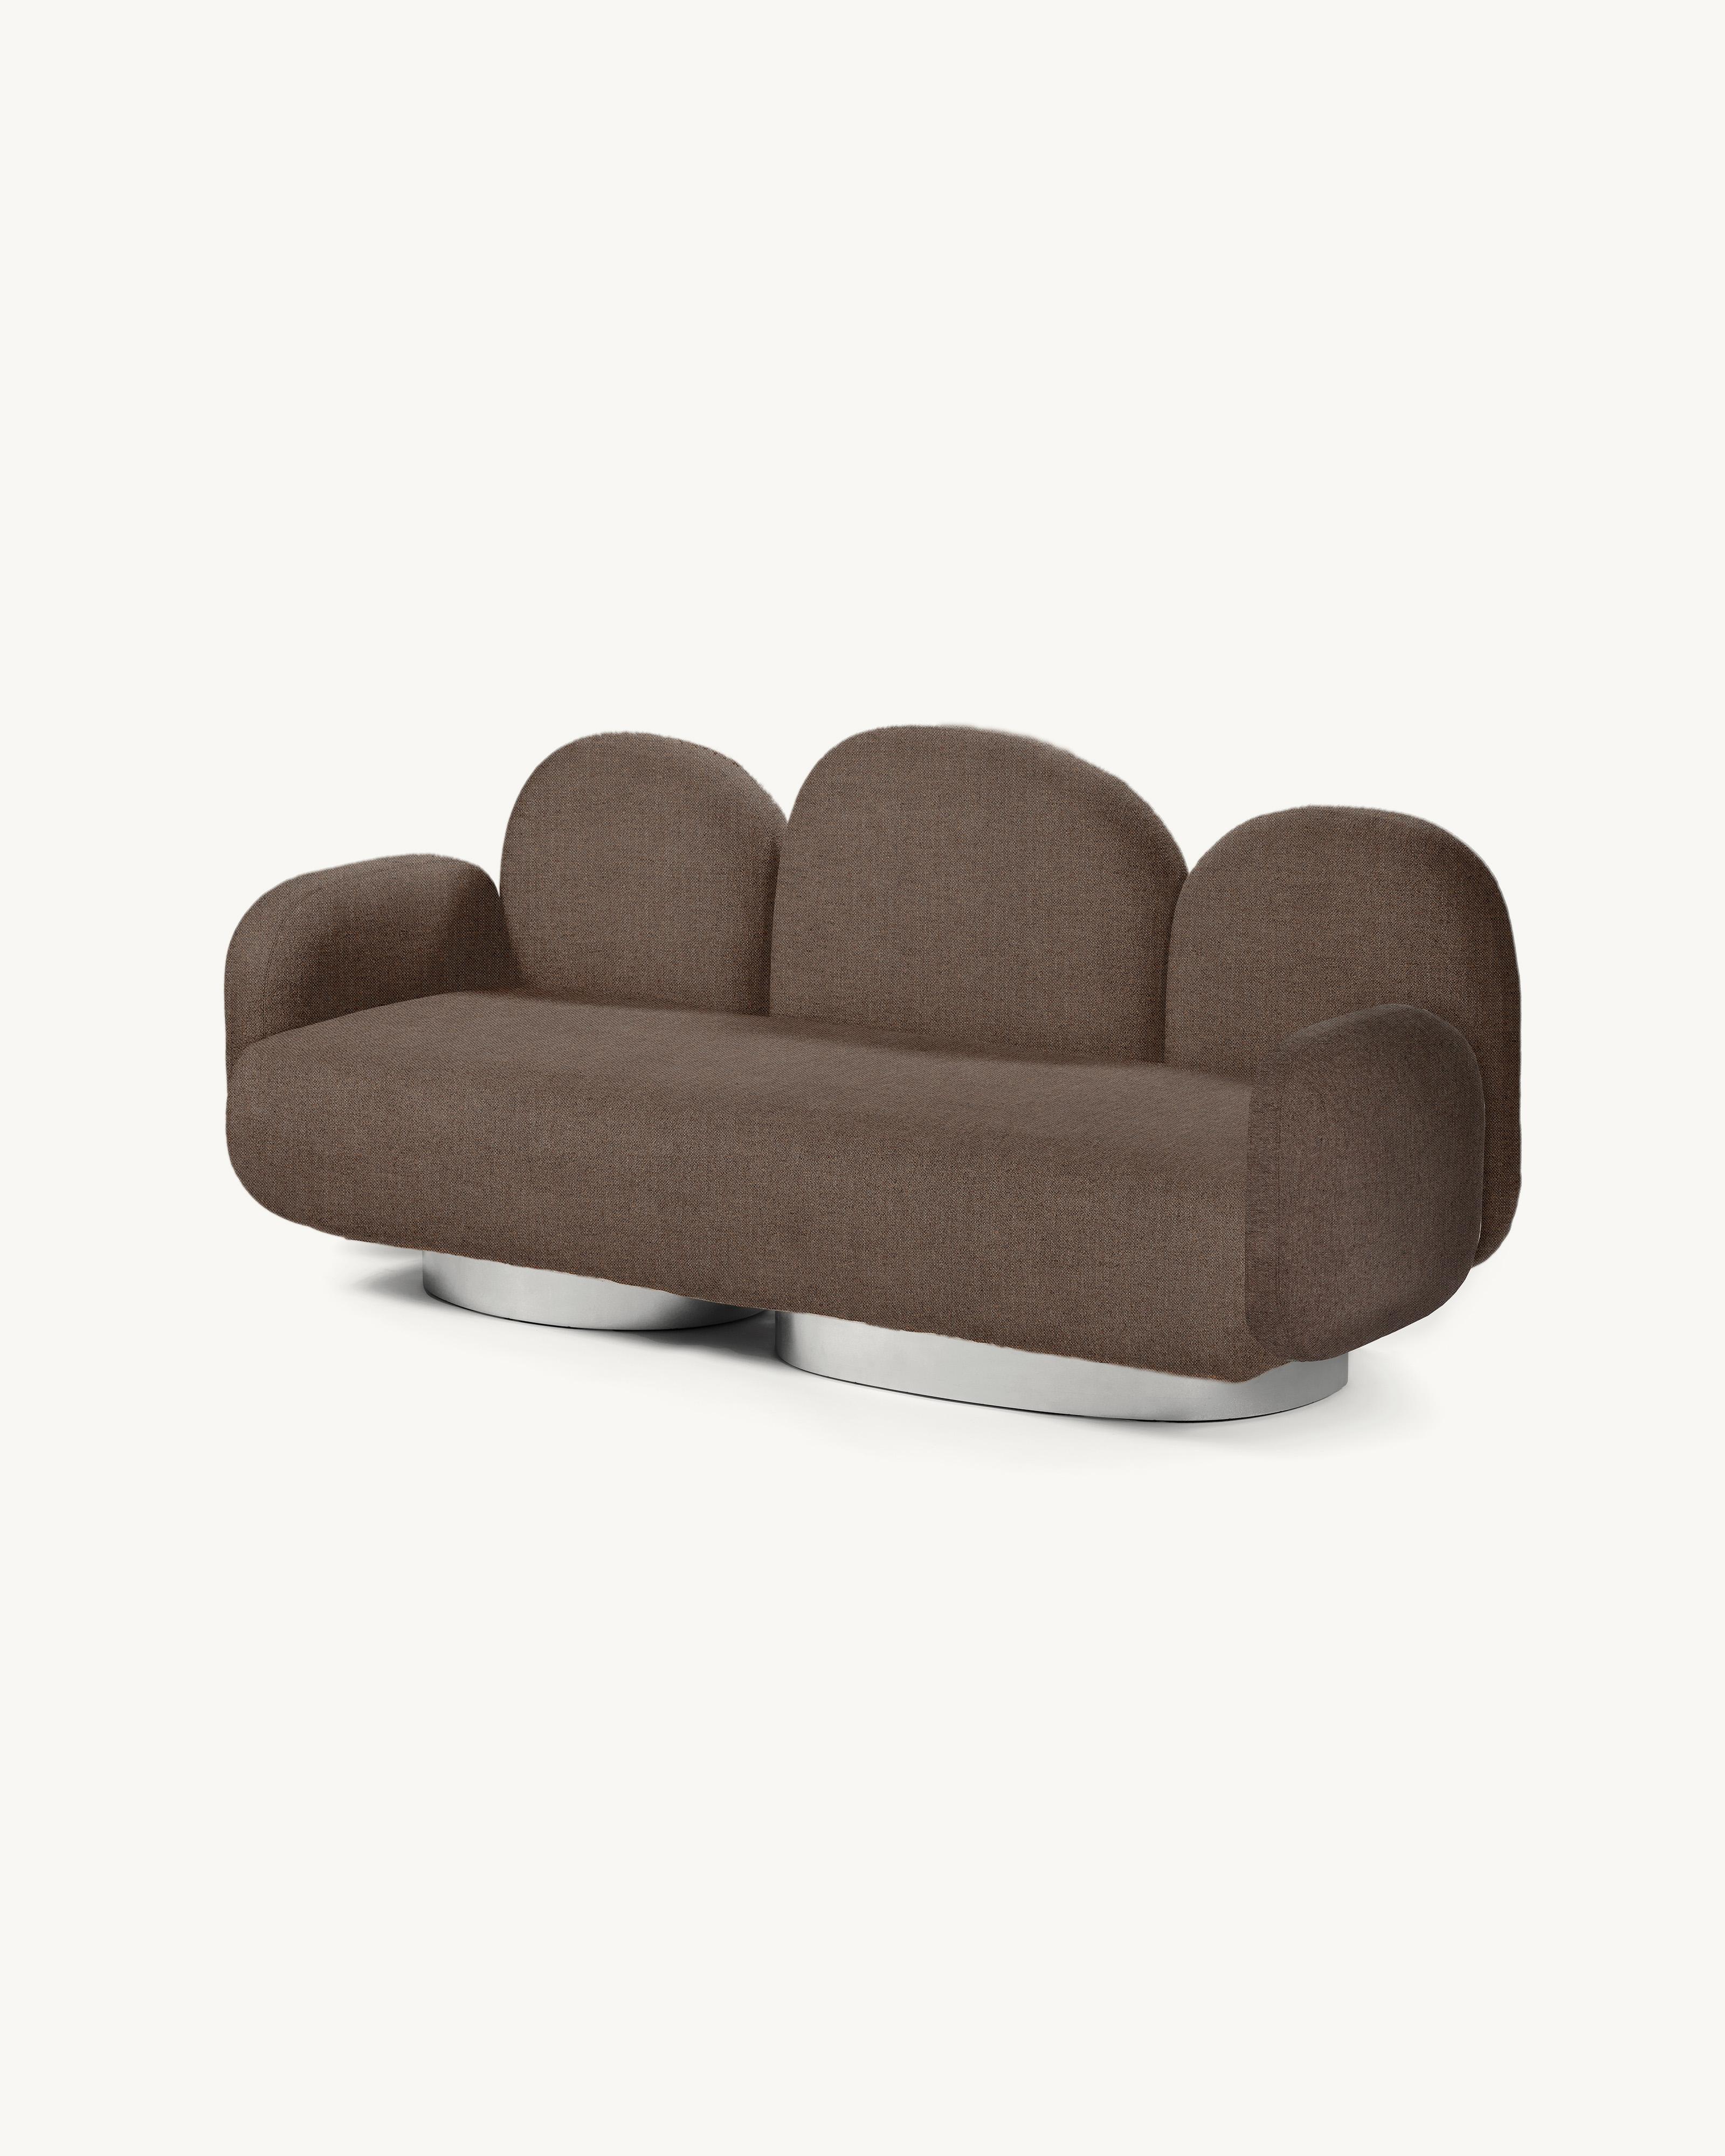 Modular Sofa Assemble 2-seat-sofa with 2 armrests 
Designed by Destroyers/Builders x Valerie Objects
Upholstery: Sevo Rust (V9020344)

Dimensions: L 87 W 213 H 85 CM (SH 40 cm)
Materials: Wood, aluminium and upholstery

The ASSEMBLE sofa encourages